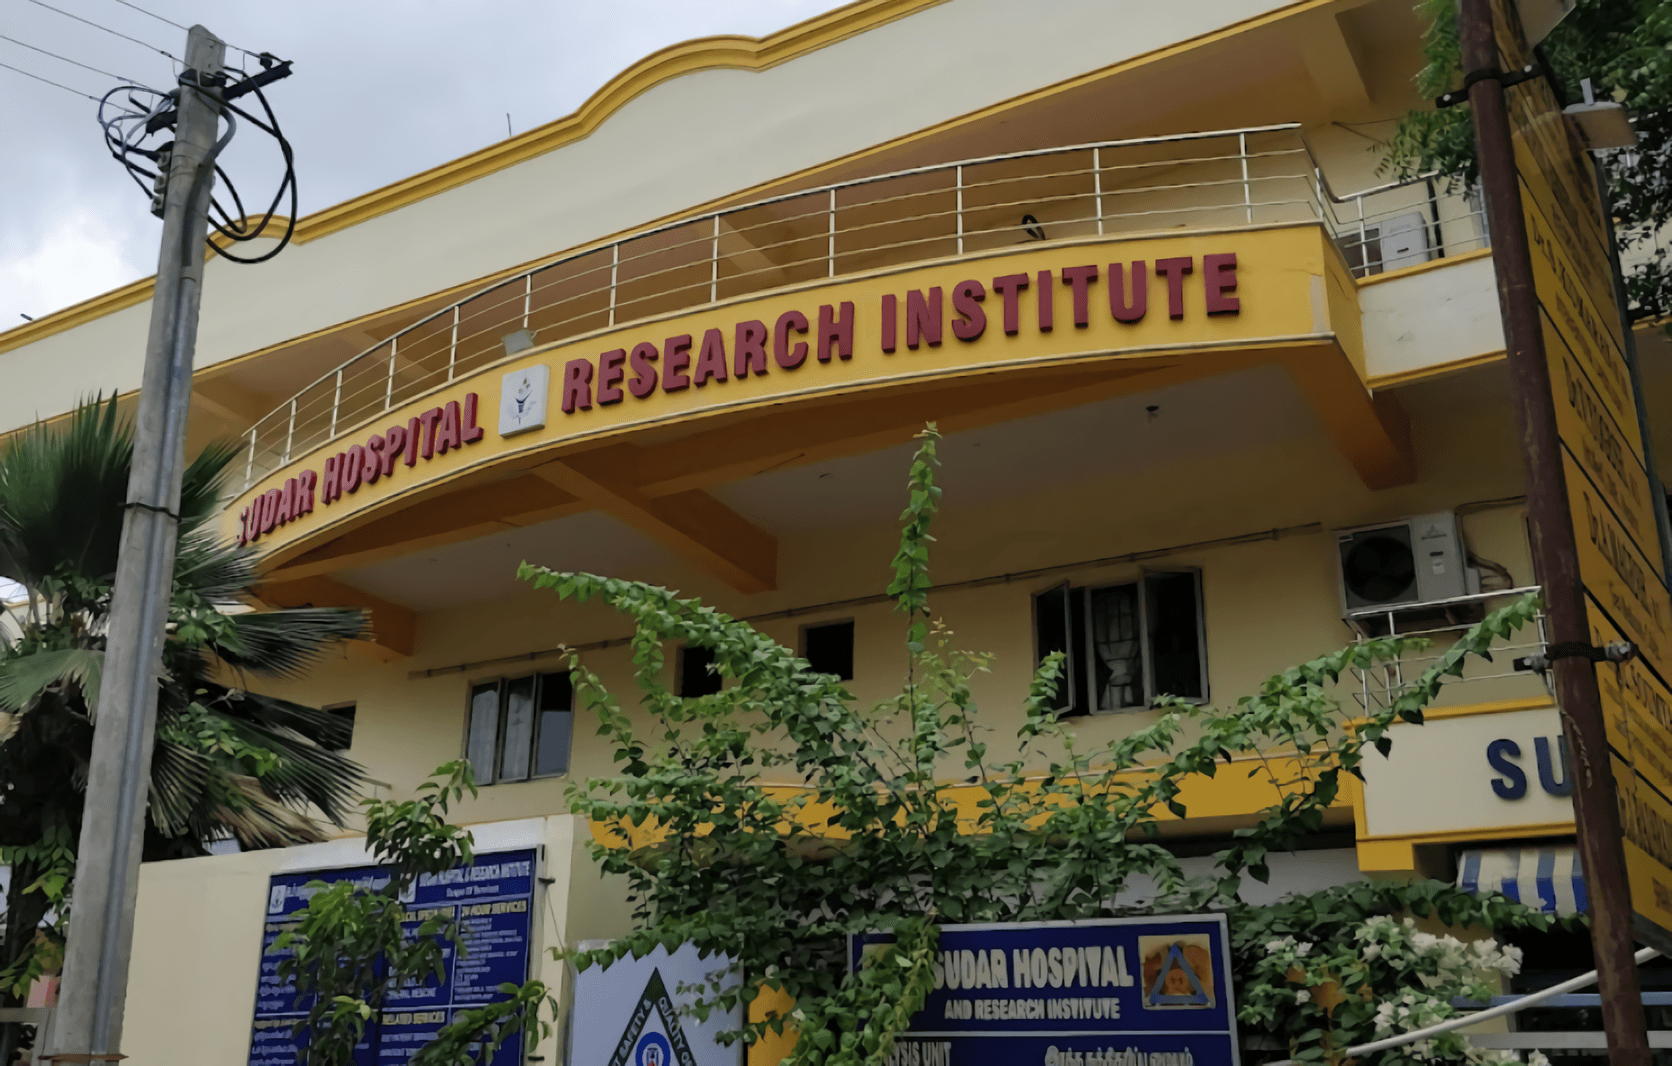 Sudhar Hospital And Research Institute